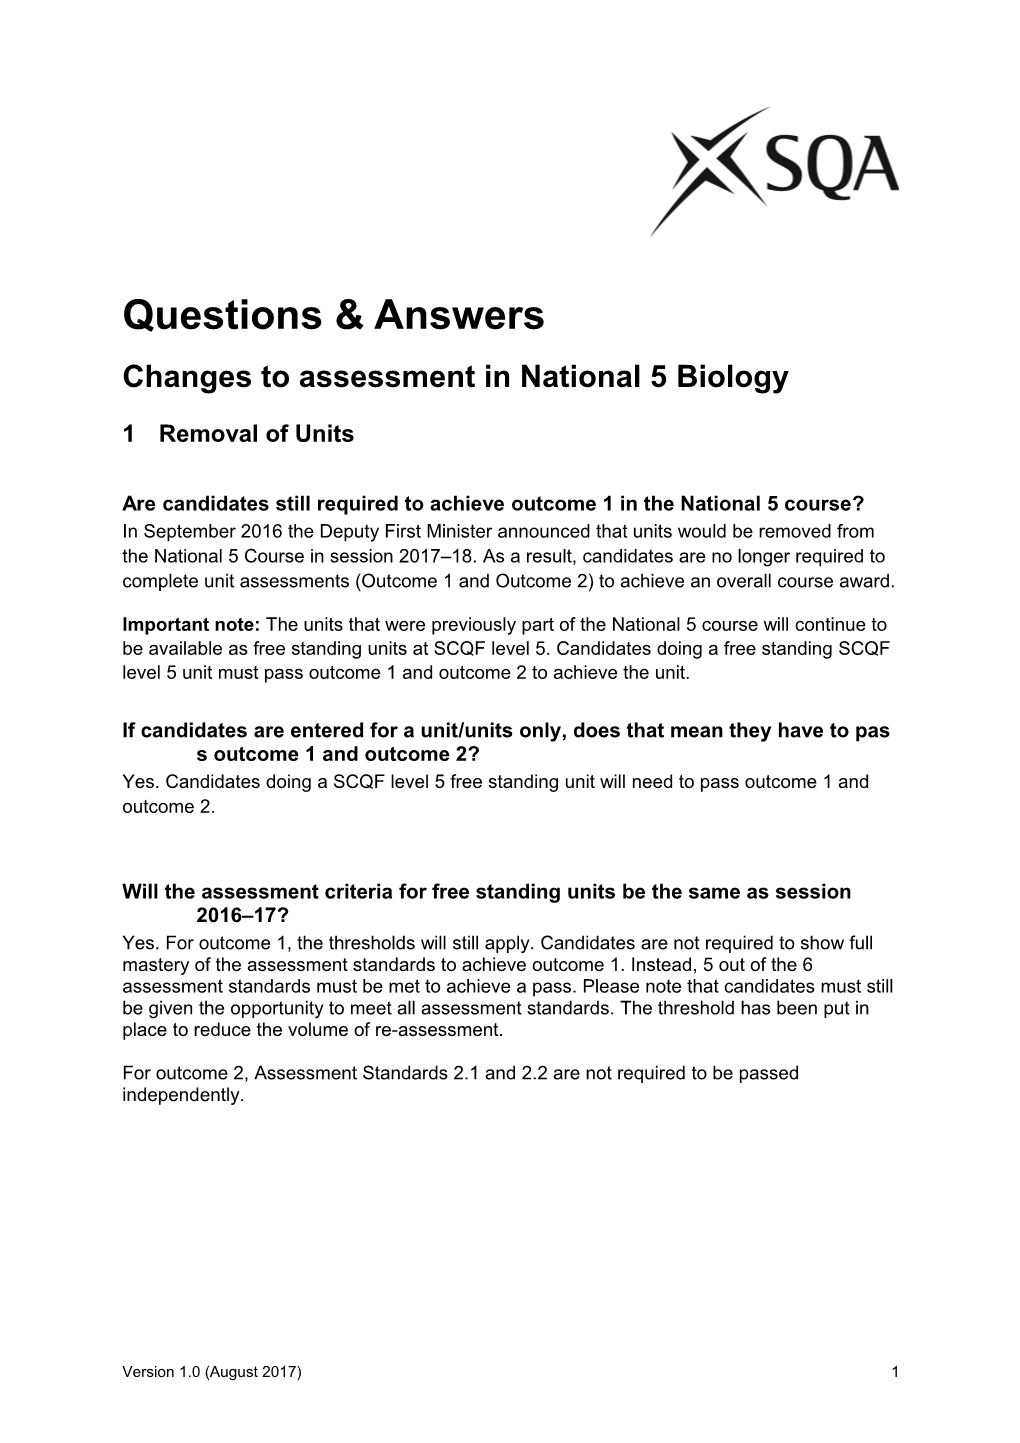 Changes to Assessment in National 5 Biology